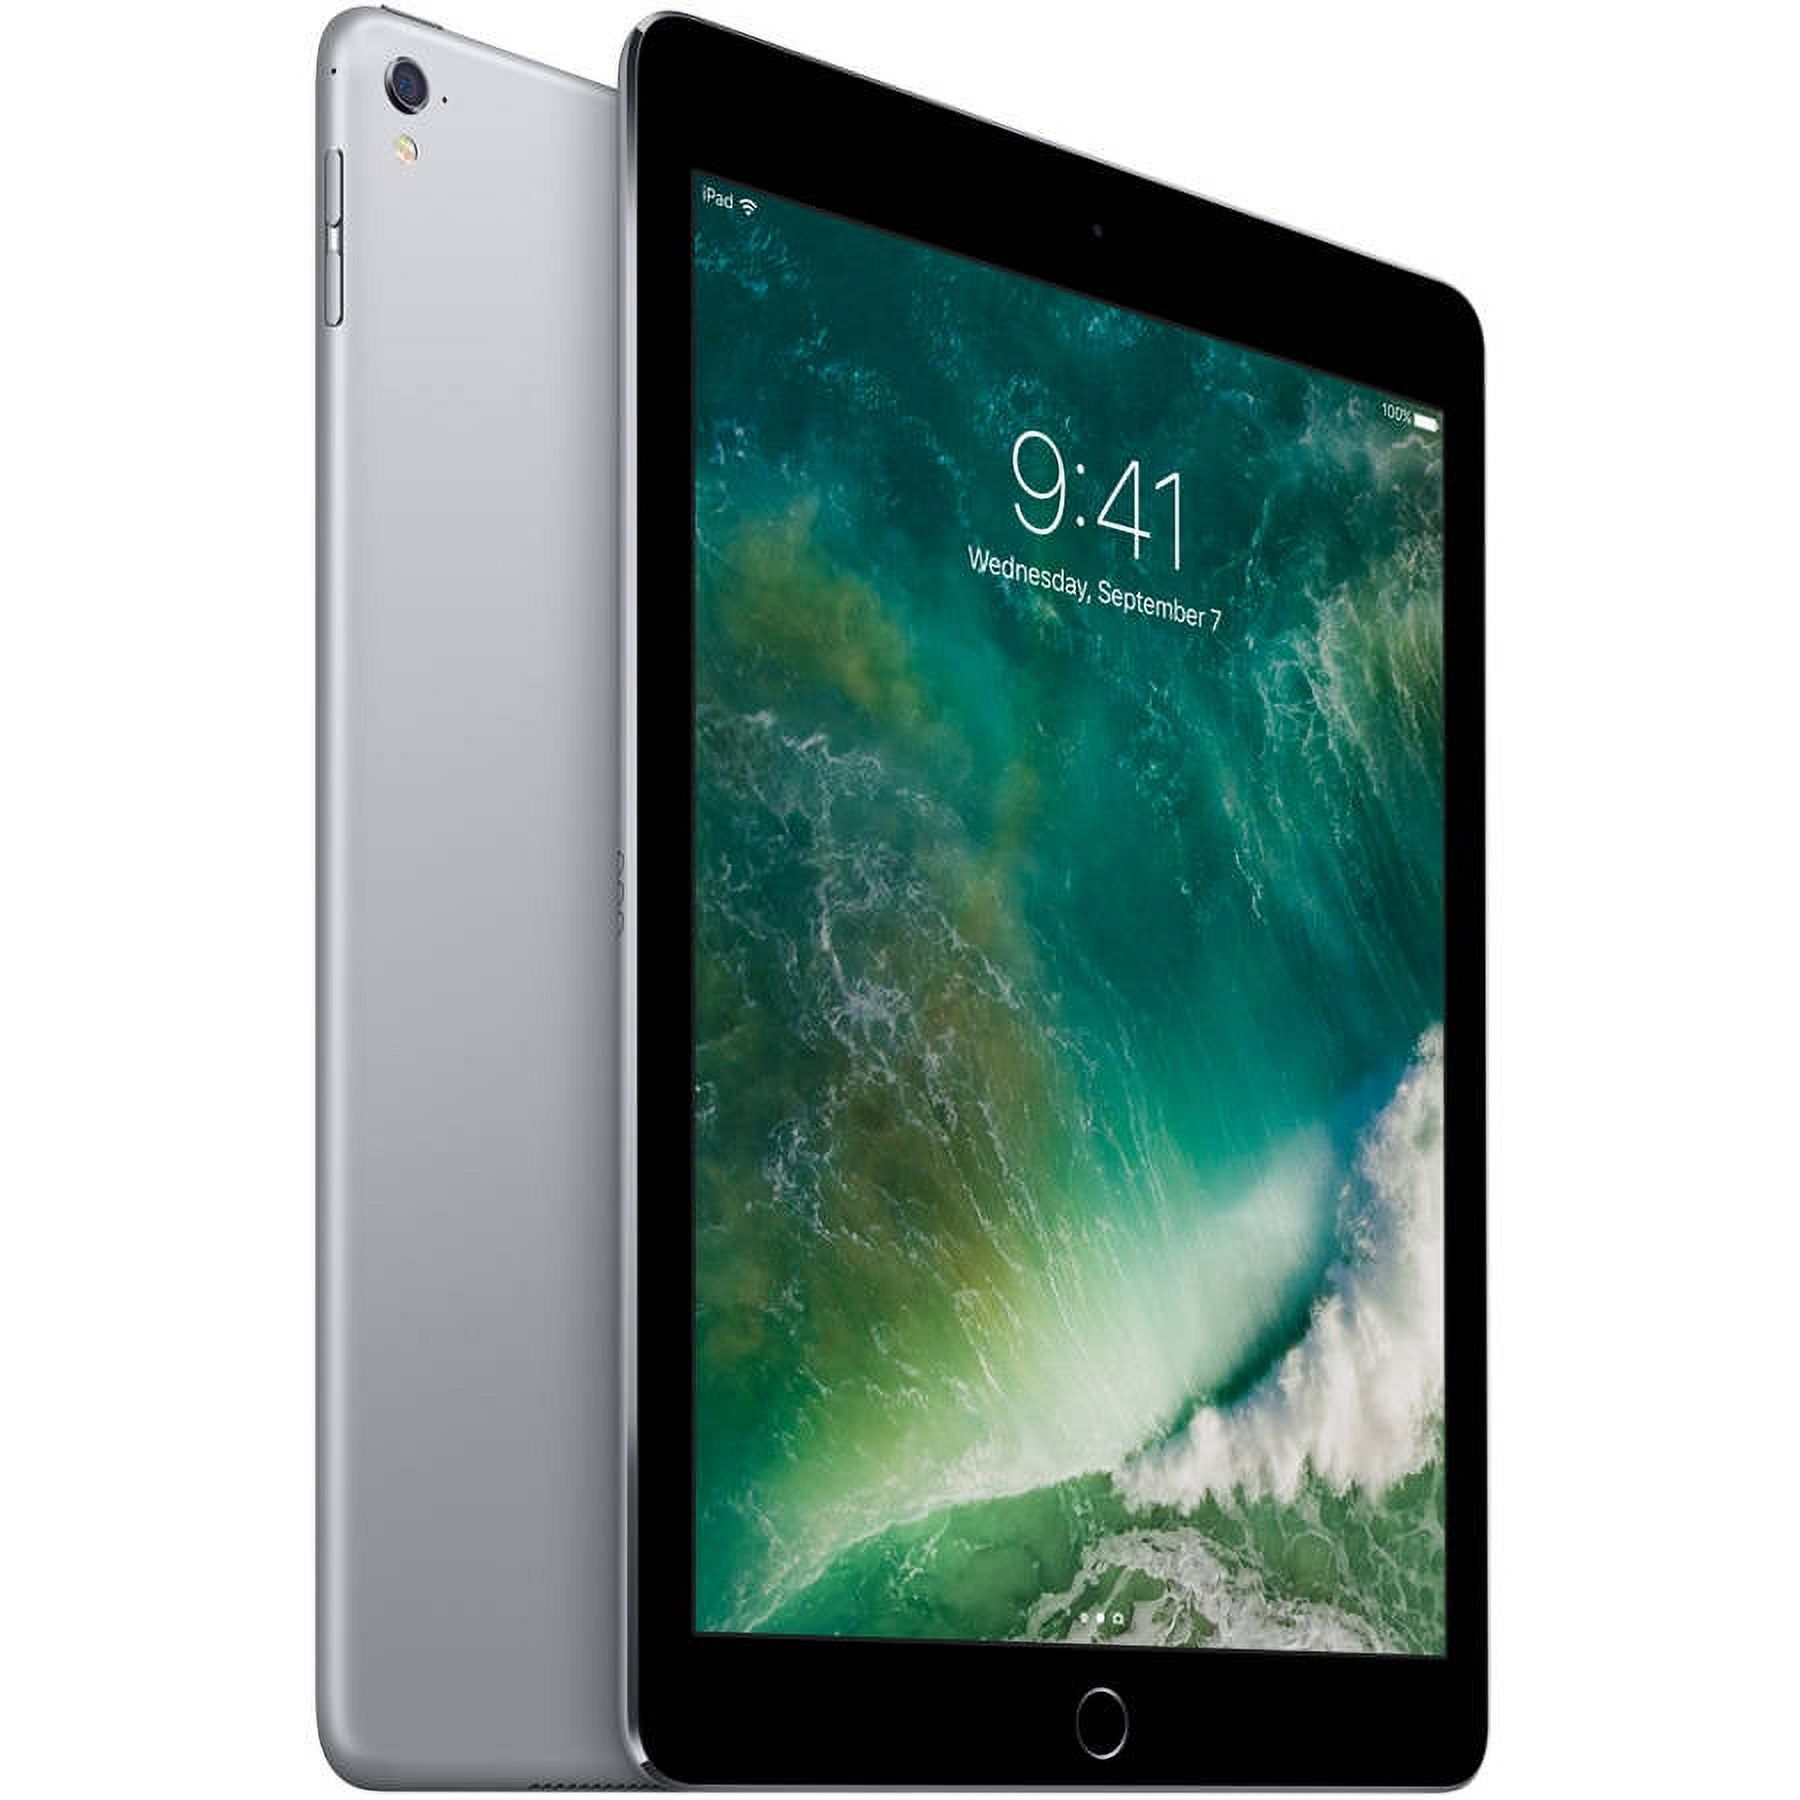 Apple iPad Pro Tablet, 9.7", Twister Dual-core (2 Core) 2.16 GHz, 2 GB RAM, 128 GB Storage, iOS 9, Space Gray - image 5 of 5